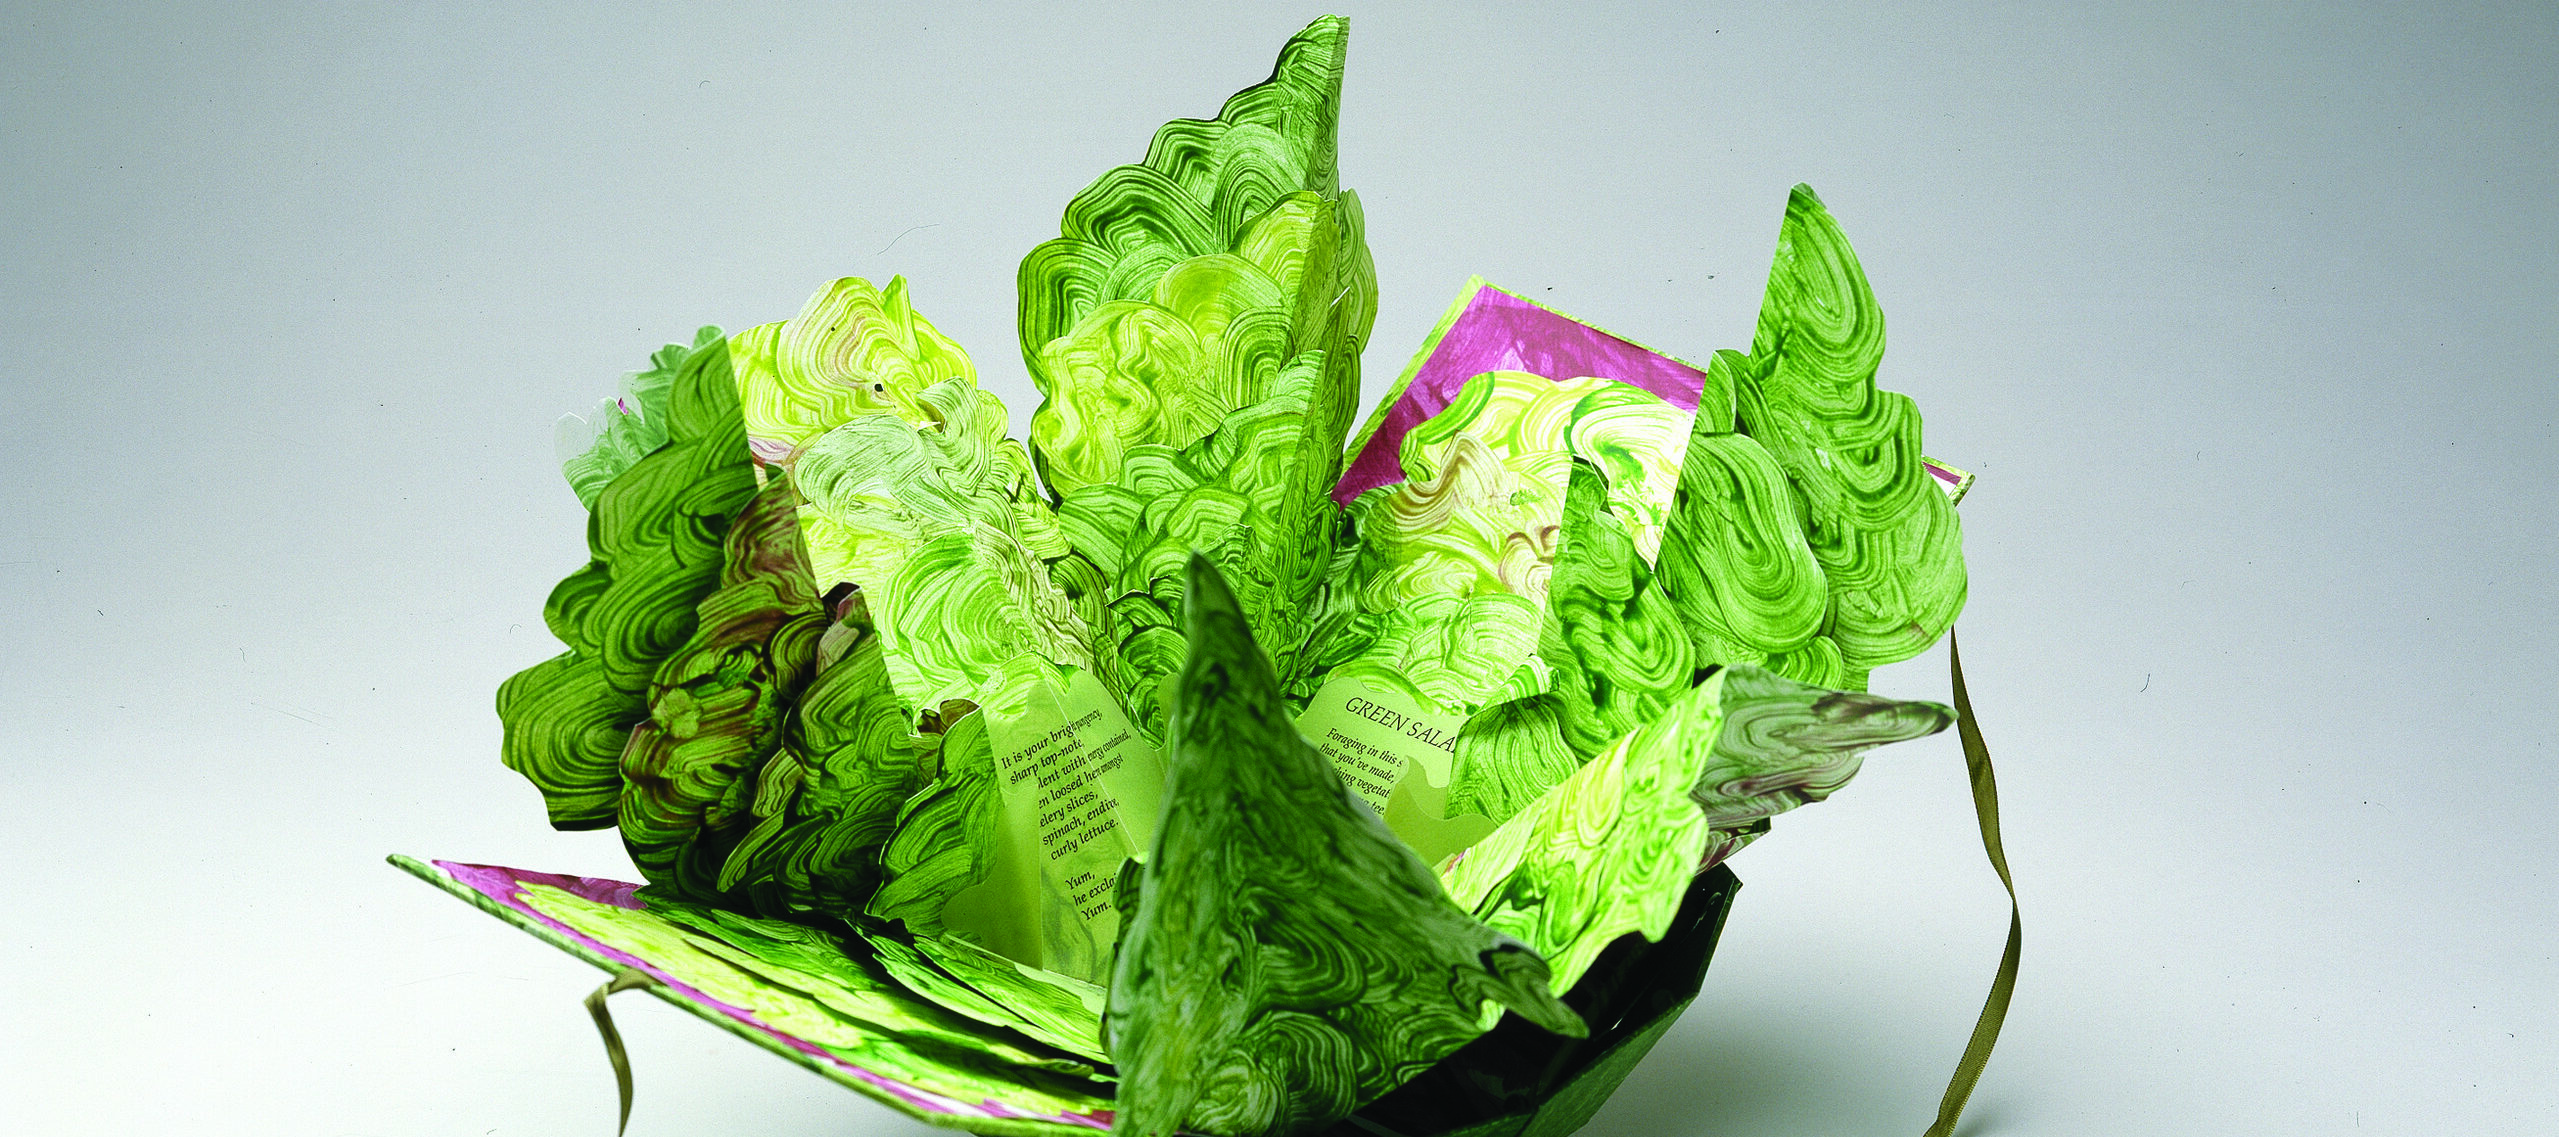 Artist's book resembling a salad in a bowl. Constructed of Tyvek that has been painted in swirling greens and map-folded to look like leaves of lettuce, there is poem written on the inner the leaves.